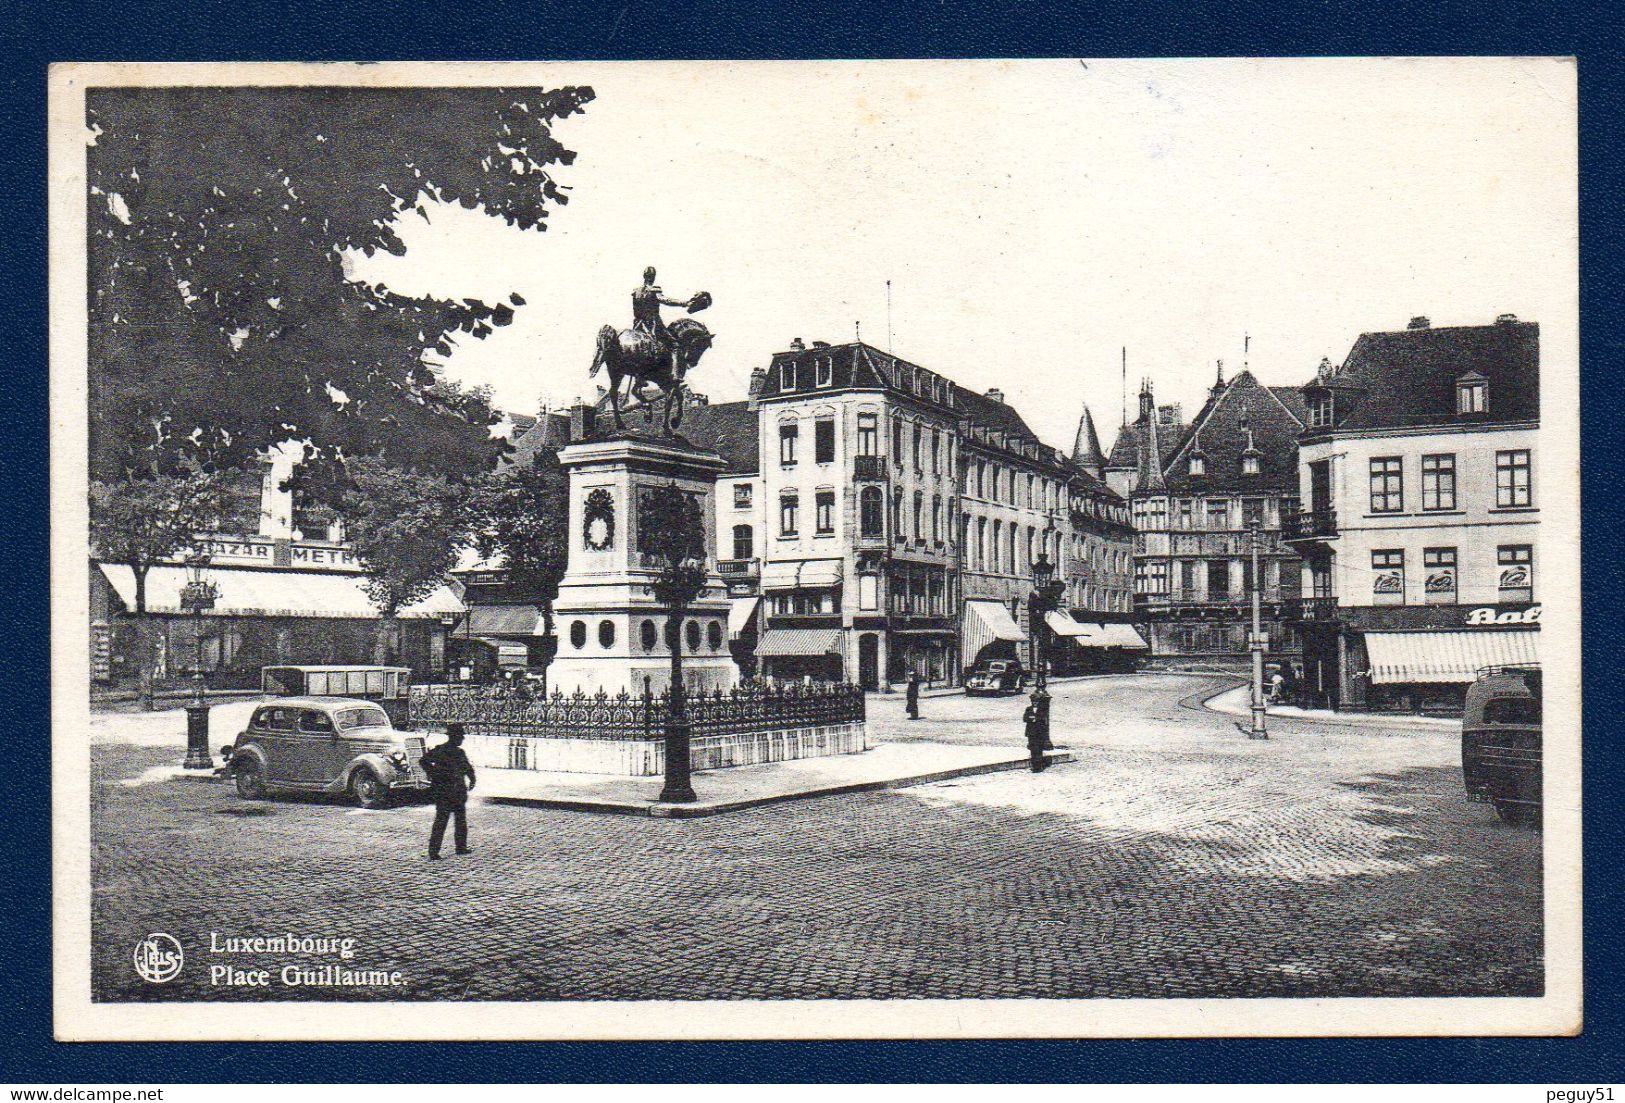 Luxembourg. Place Guillaume. Grand Bazar Metropole ( 1932- Willy Et Félix Capus- Ackermann). 1949 - Luxemburg - Stad